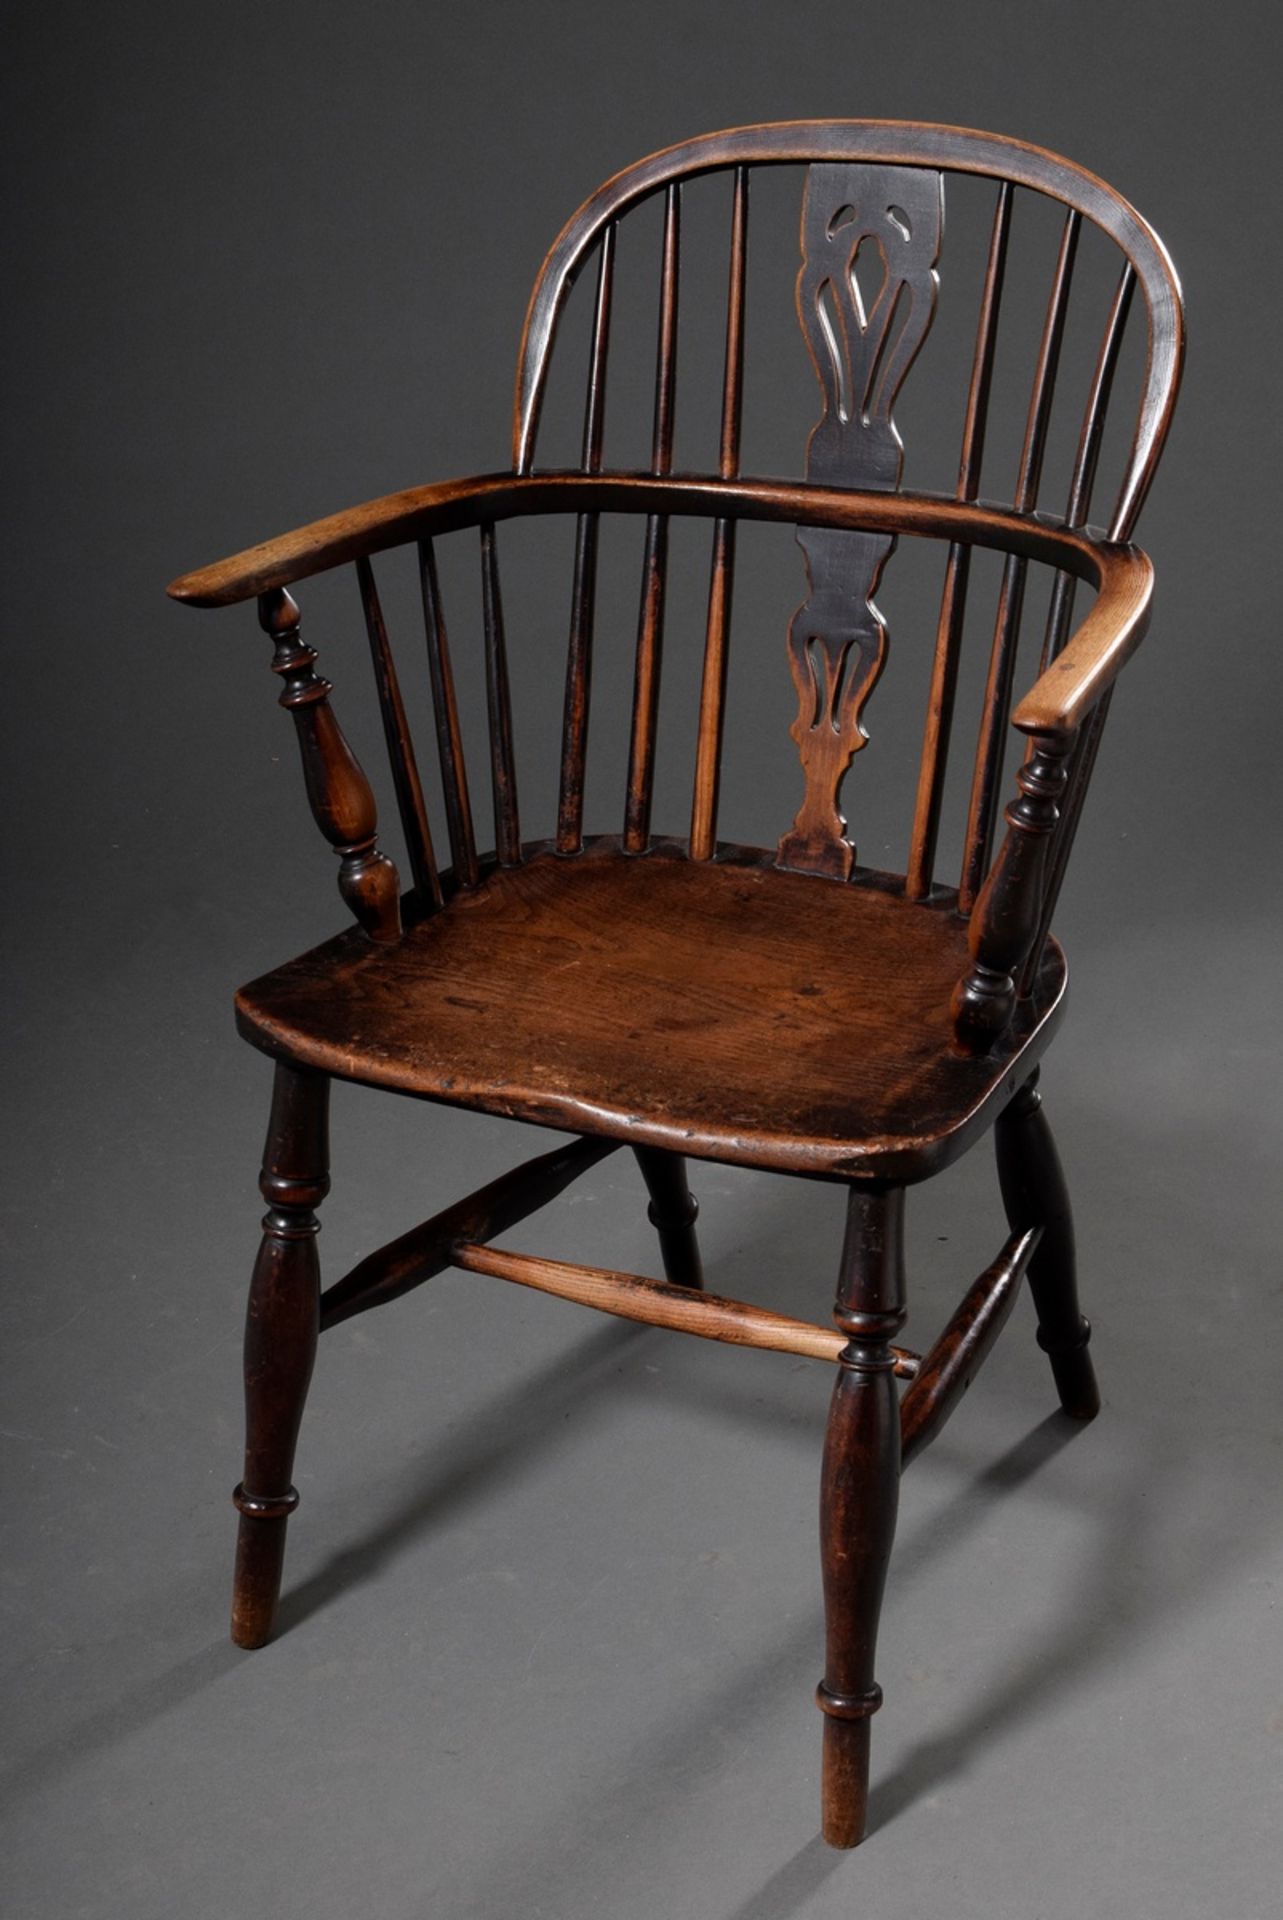 Pair of Windsor Chairs, elm stained, h. 45/89 u. 92, signs of age and use - Image 2 of 6